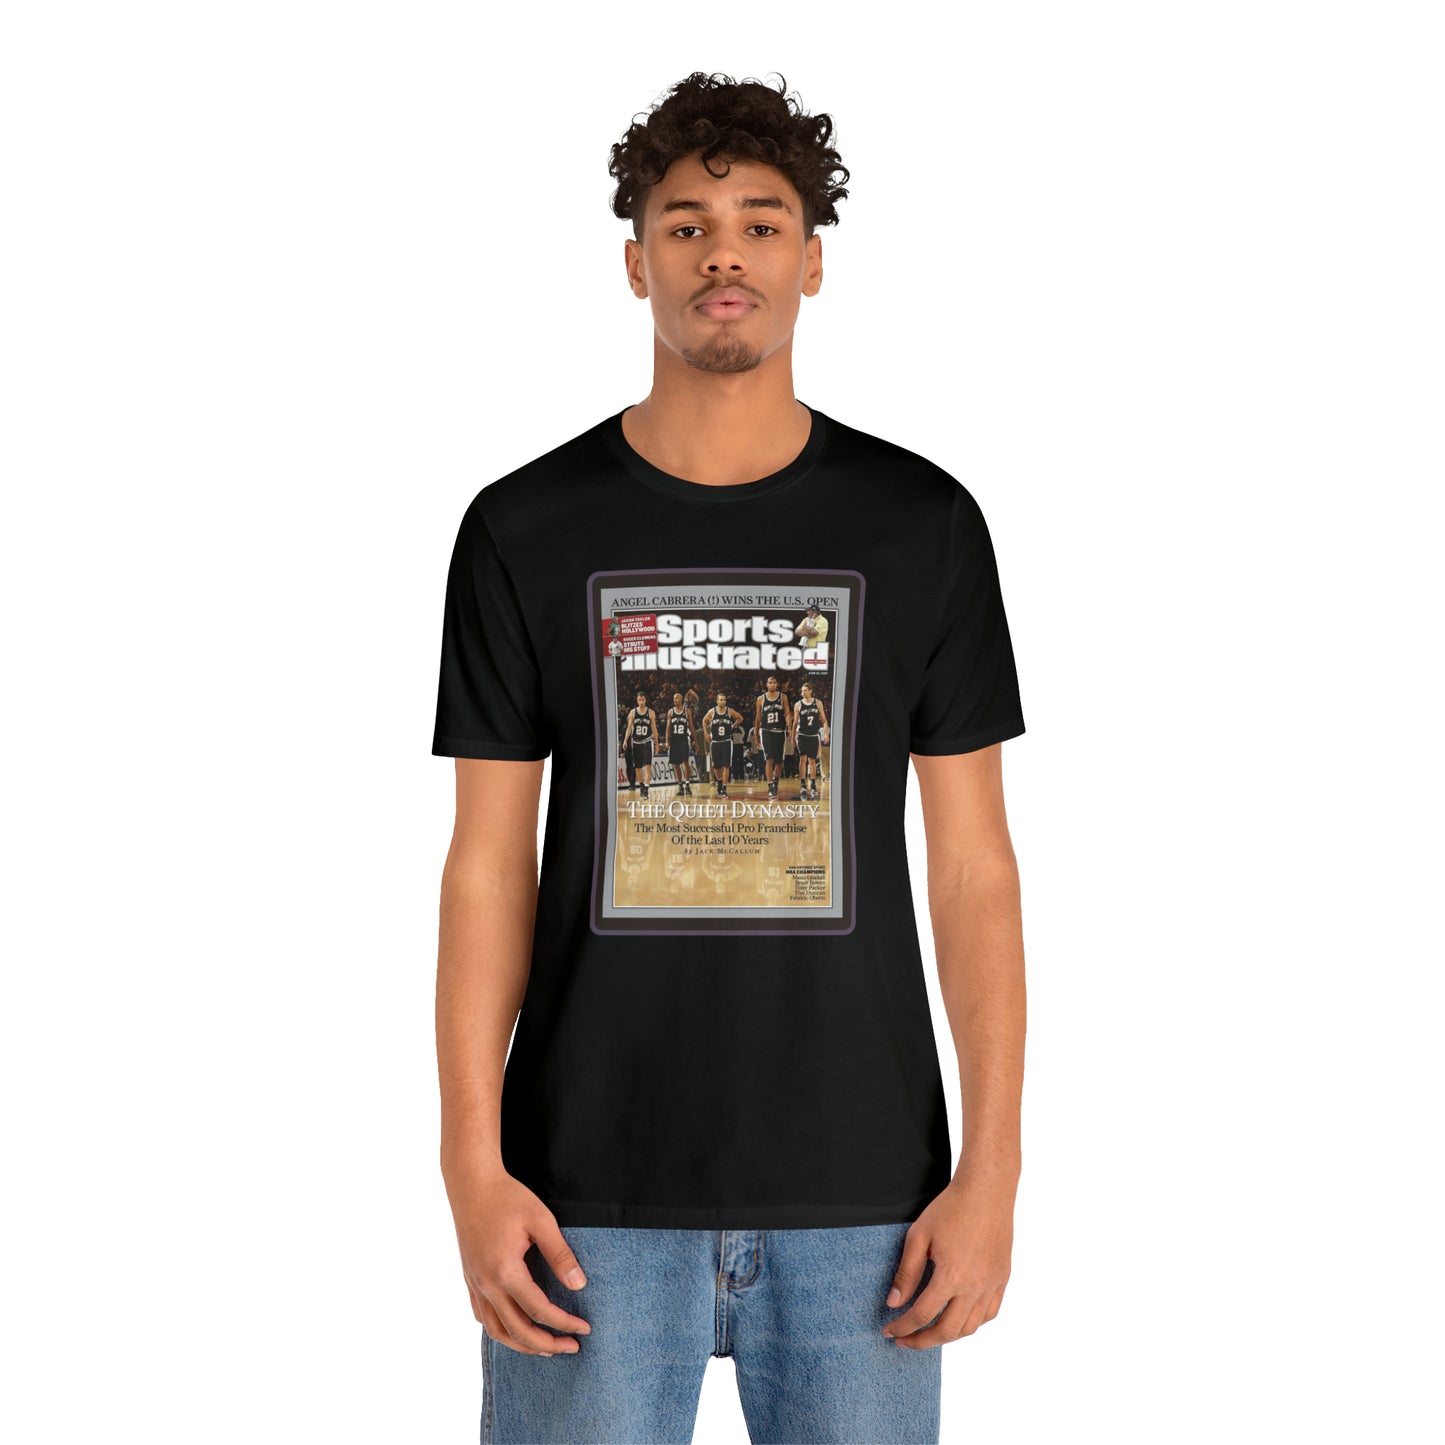 90s Throwback Spurs Basketball Sports Illustrated Unisex Jersey Short Sleeve Tee